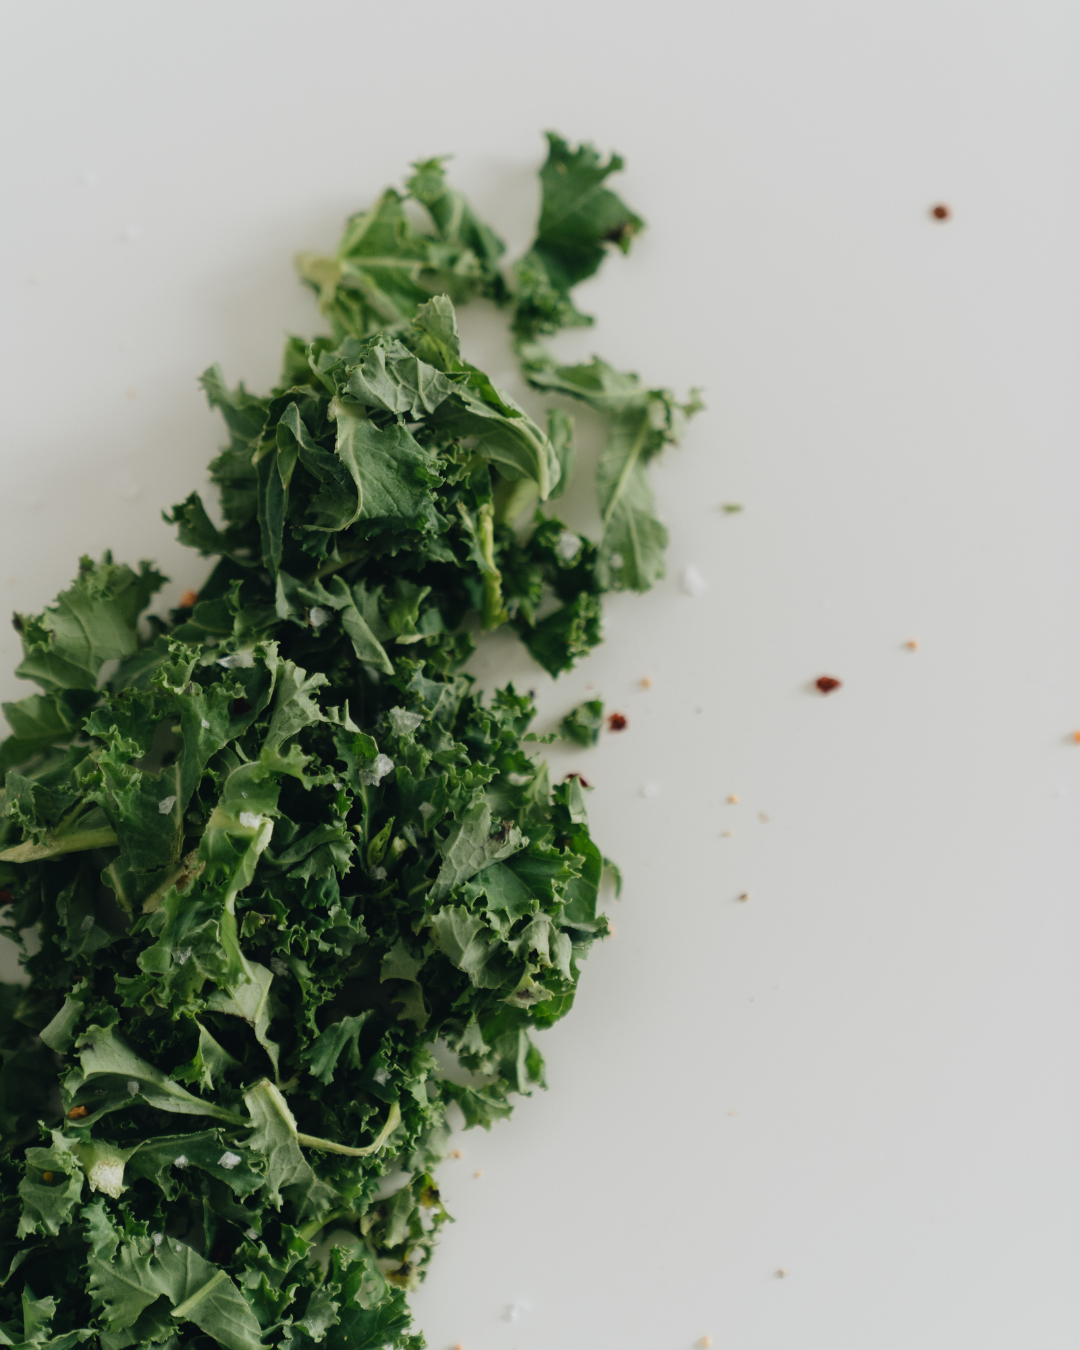 Crispy Kale Chips Recipe - Make Your Own at Home! kale+chips+recipe+ +kale+close+up